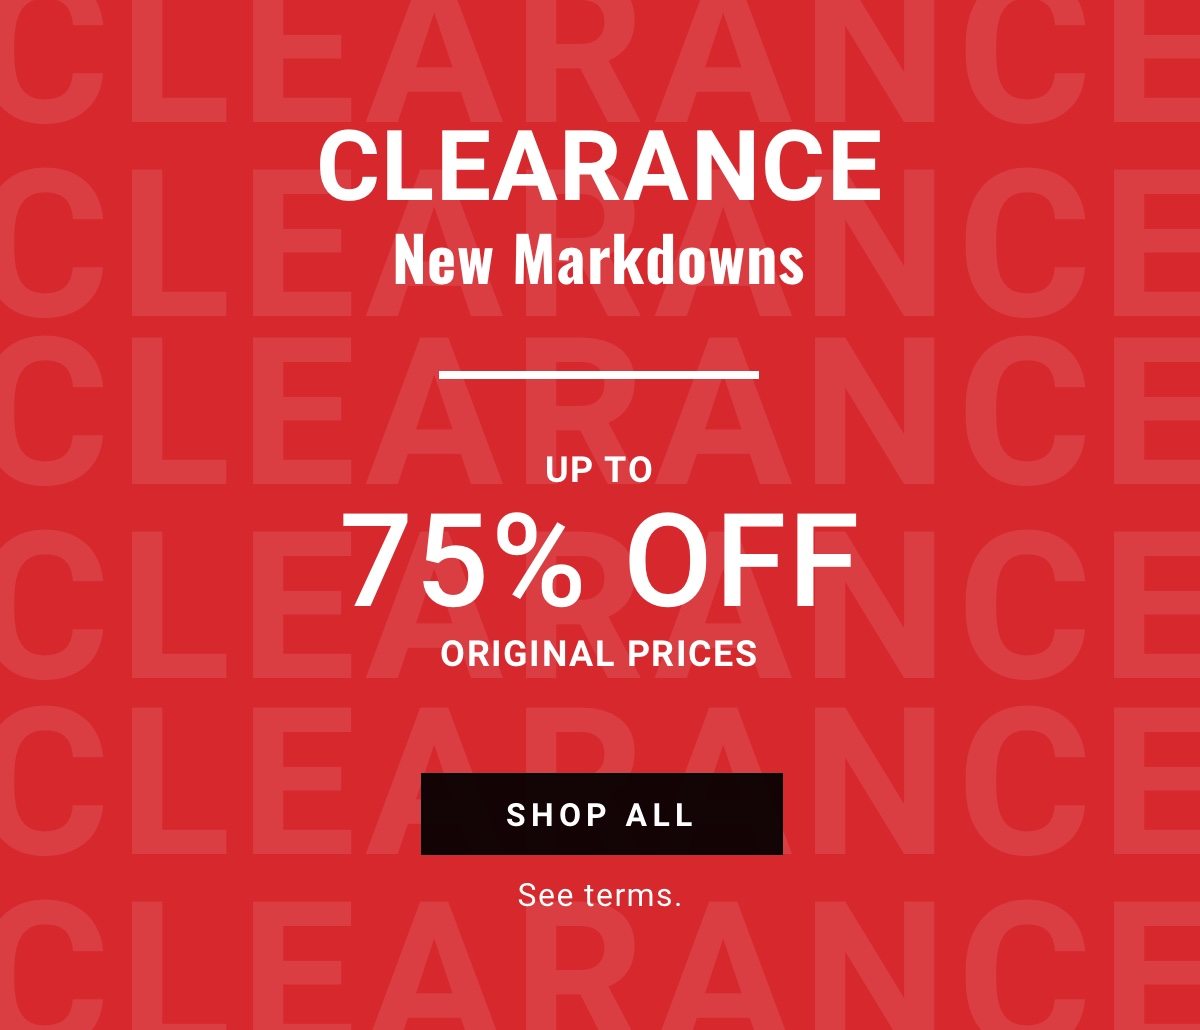 Clearance New Markdowns Up to 75 Percent Off Original Prices